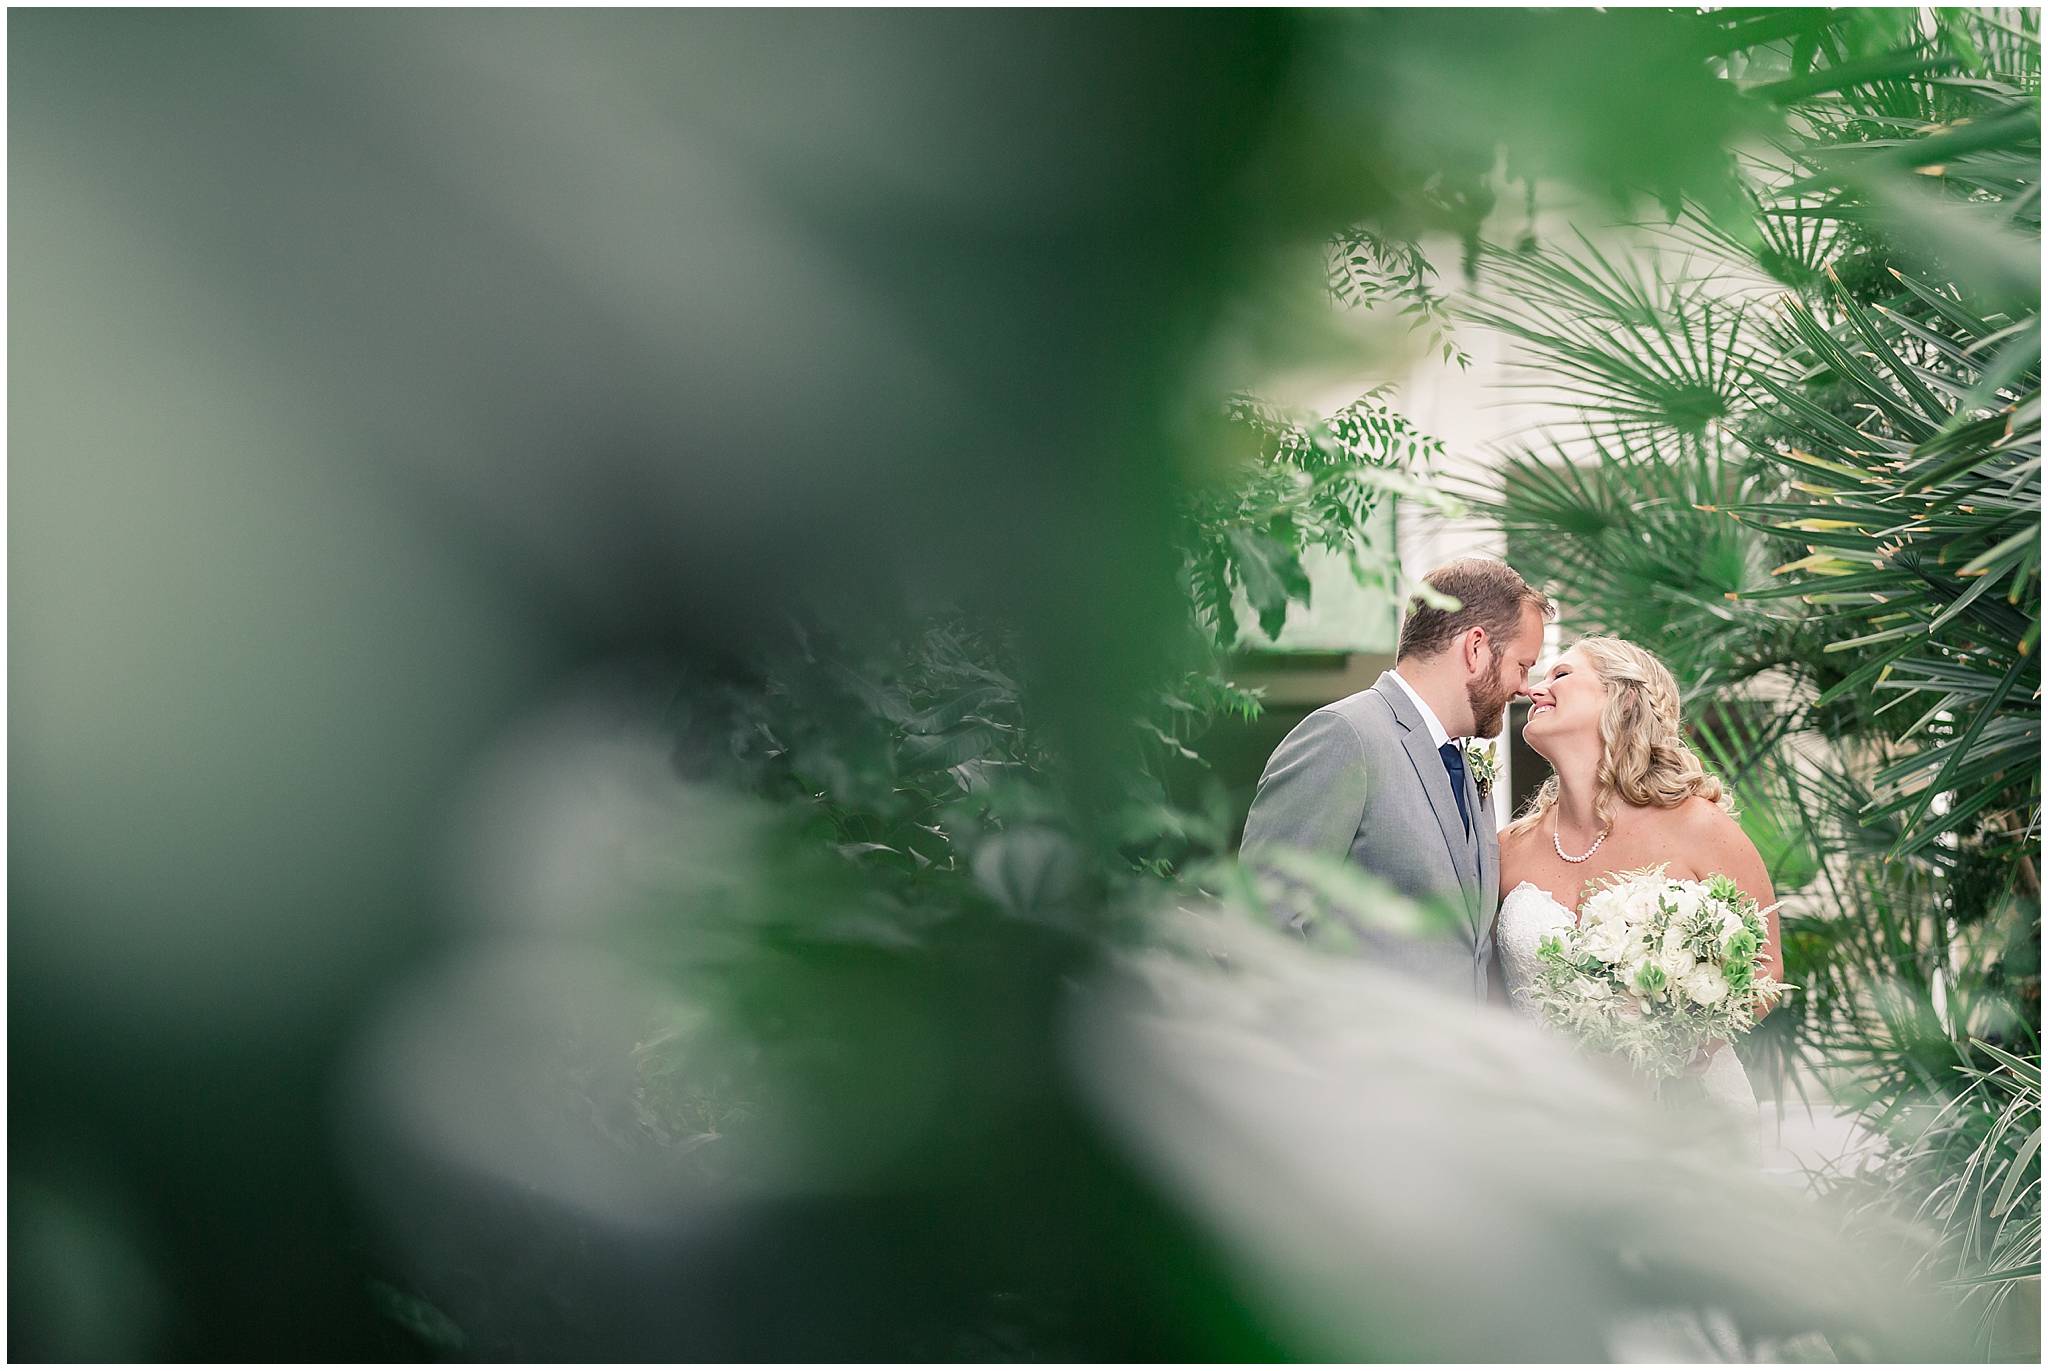 UGA STATE BOTANICAL GARDENS WEDDING PICTURES PHOTOGRAPHERS IN ATHENS